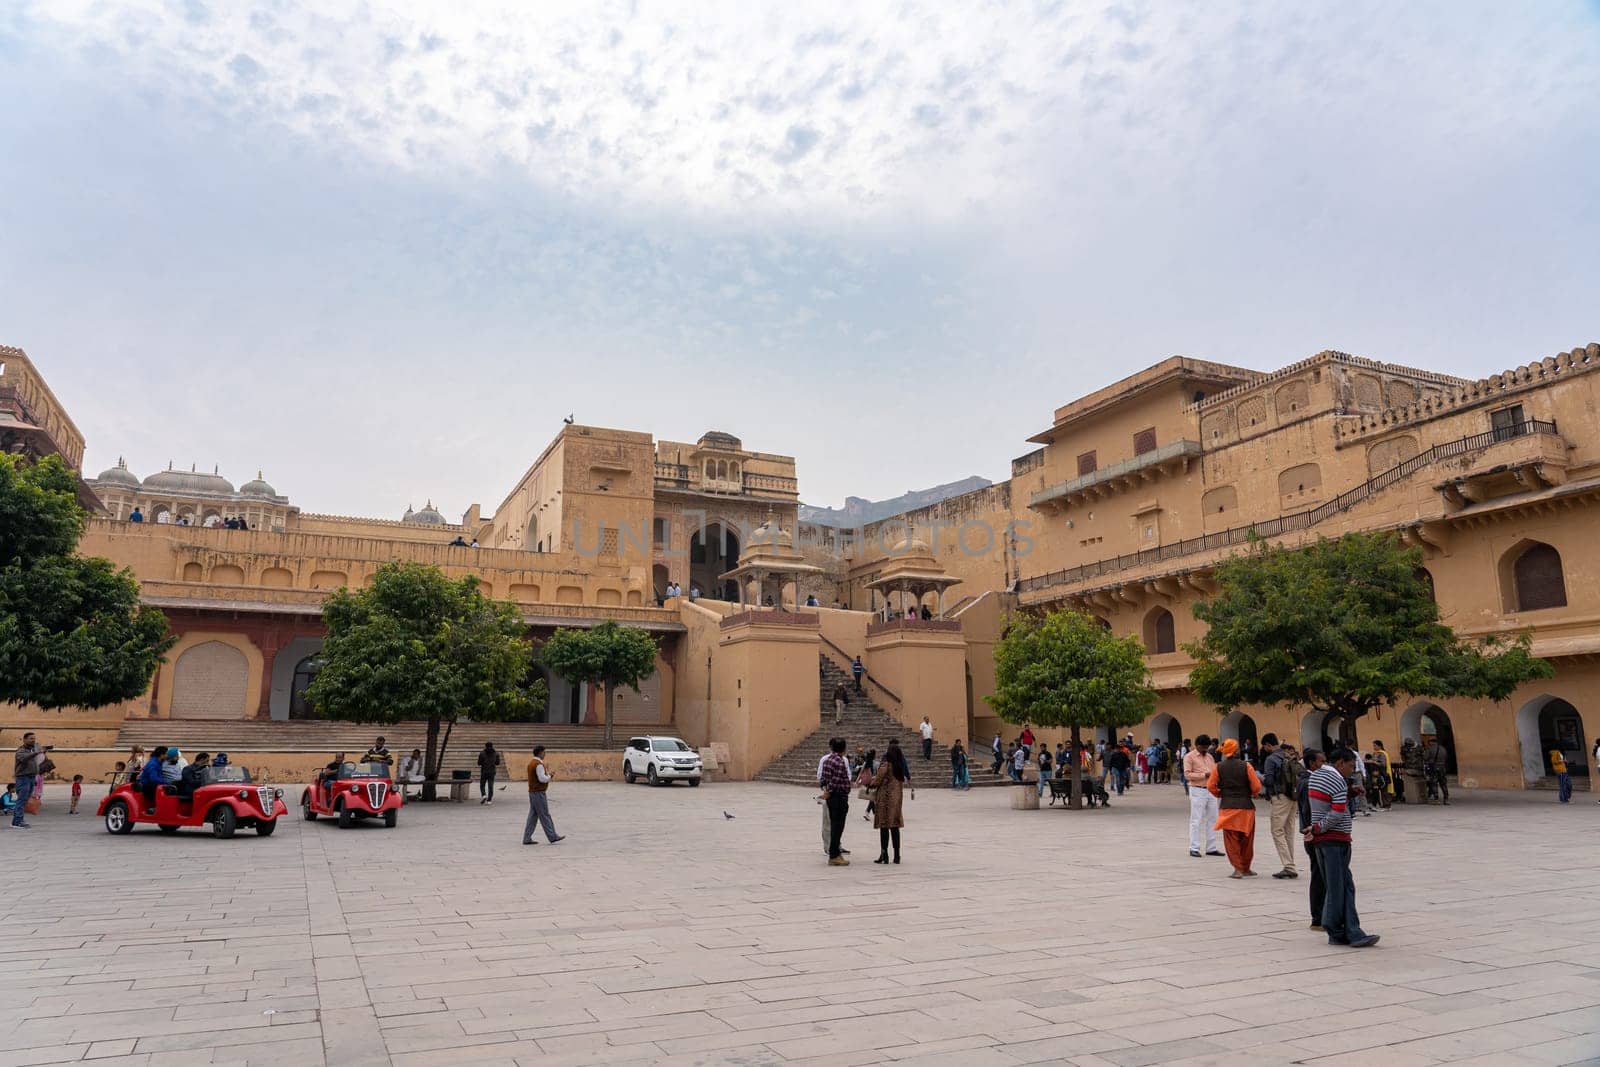 Jaipur, India - December 12, 2019: People in the courtyard at historic Amber Fort